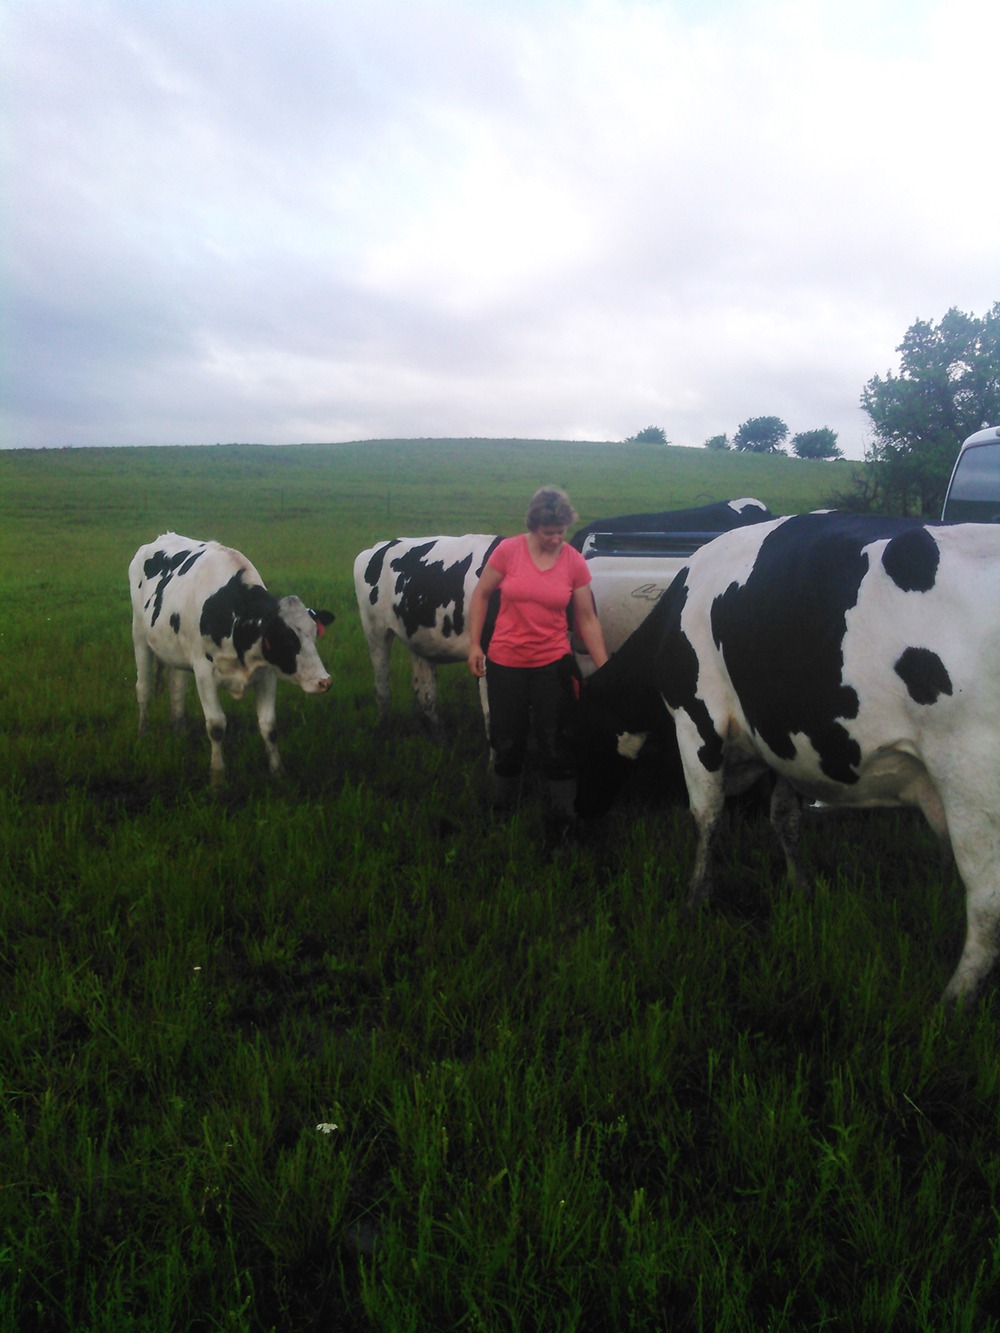 An unusual sight in the Flint Hills, dry gestating dairy cows graze native pastures at Vos Dairy operated by Ria Vos near Cedar Point.